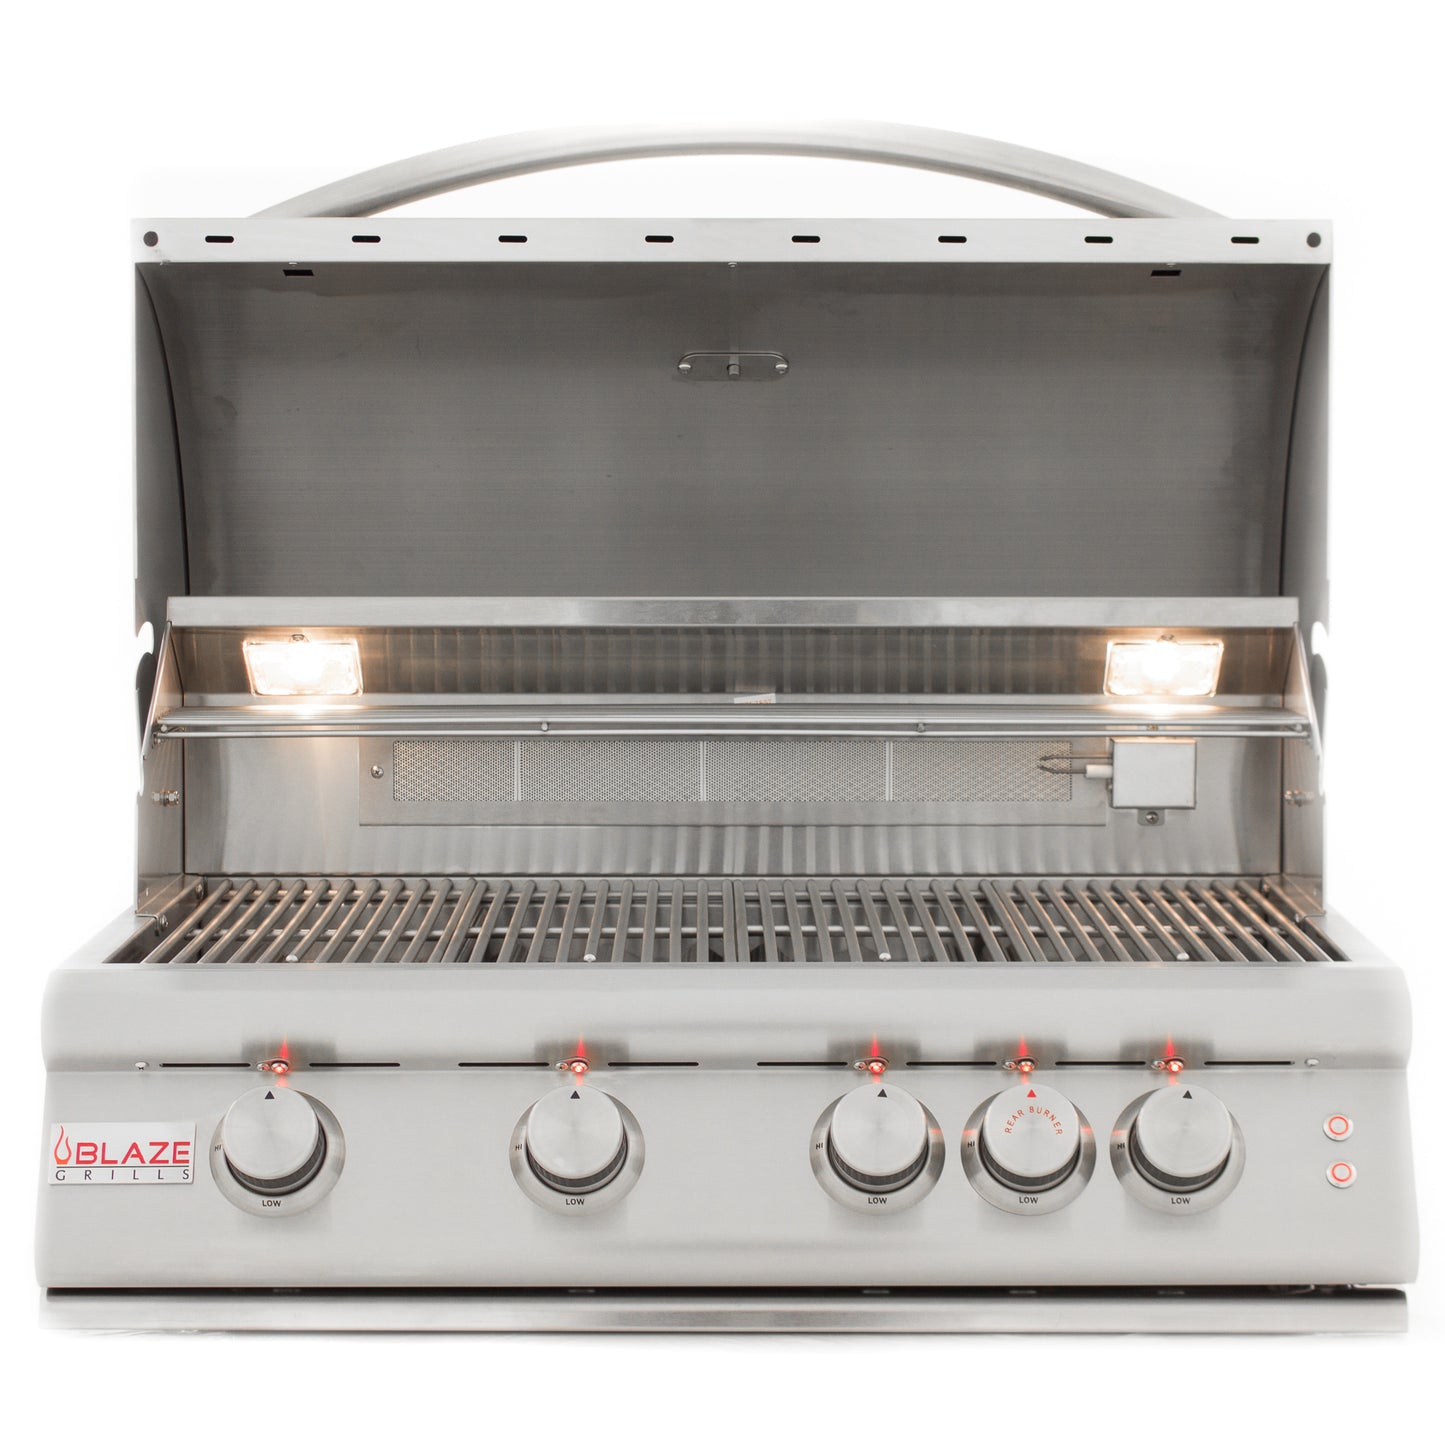 Blaze 4 LTE - 32" Grill with Lights LP